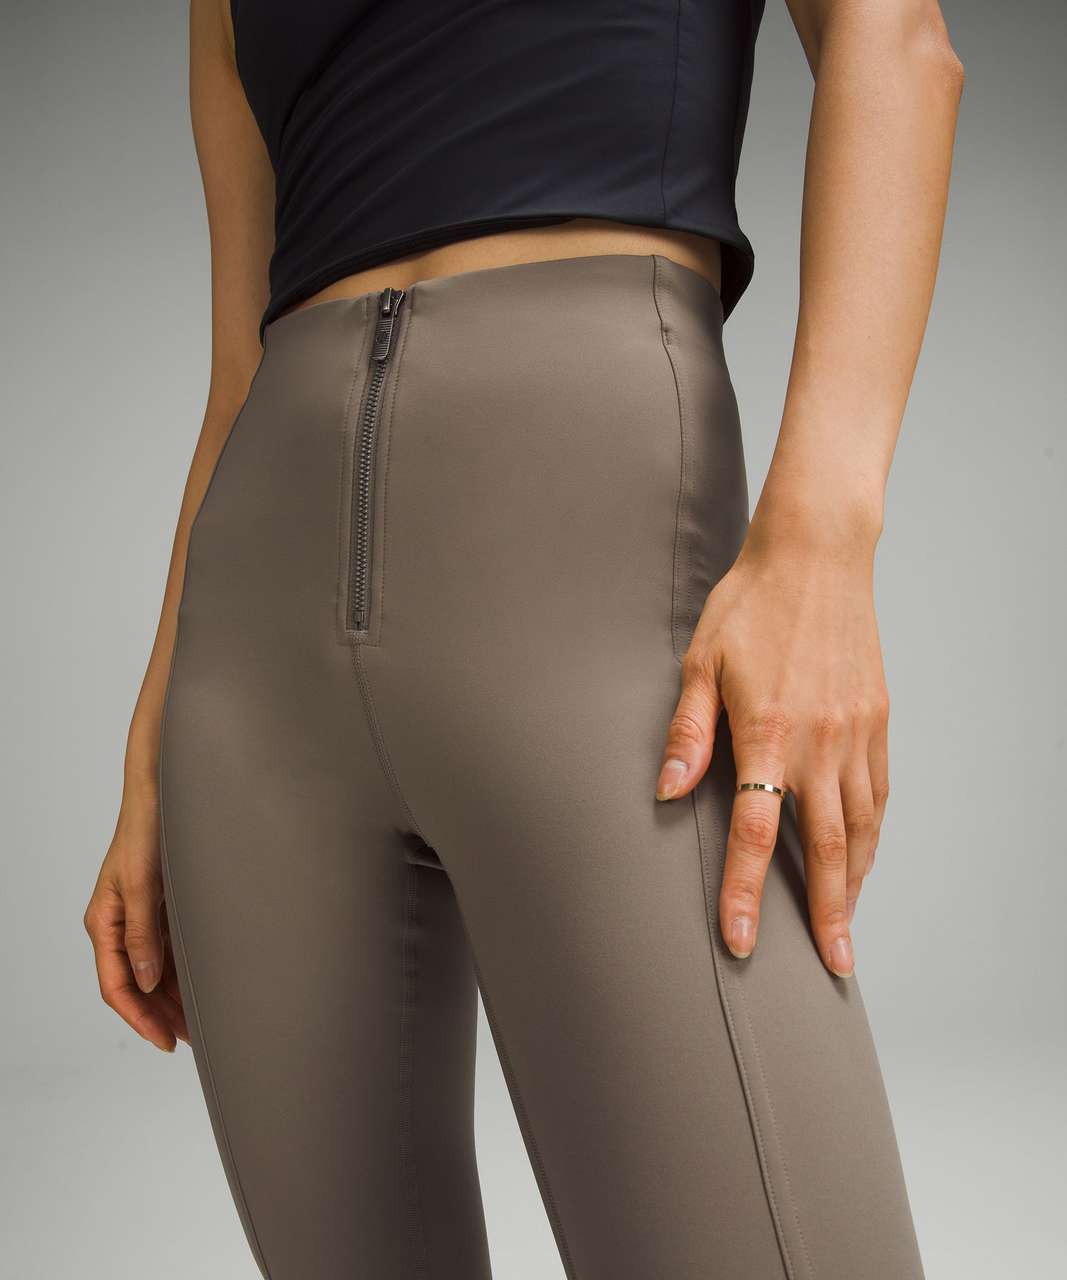 smooth fit HR pant: snug fit. zip front pockets. LENGTH!! Finally